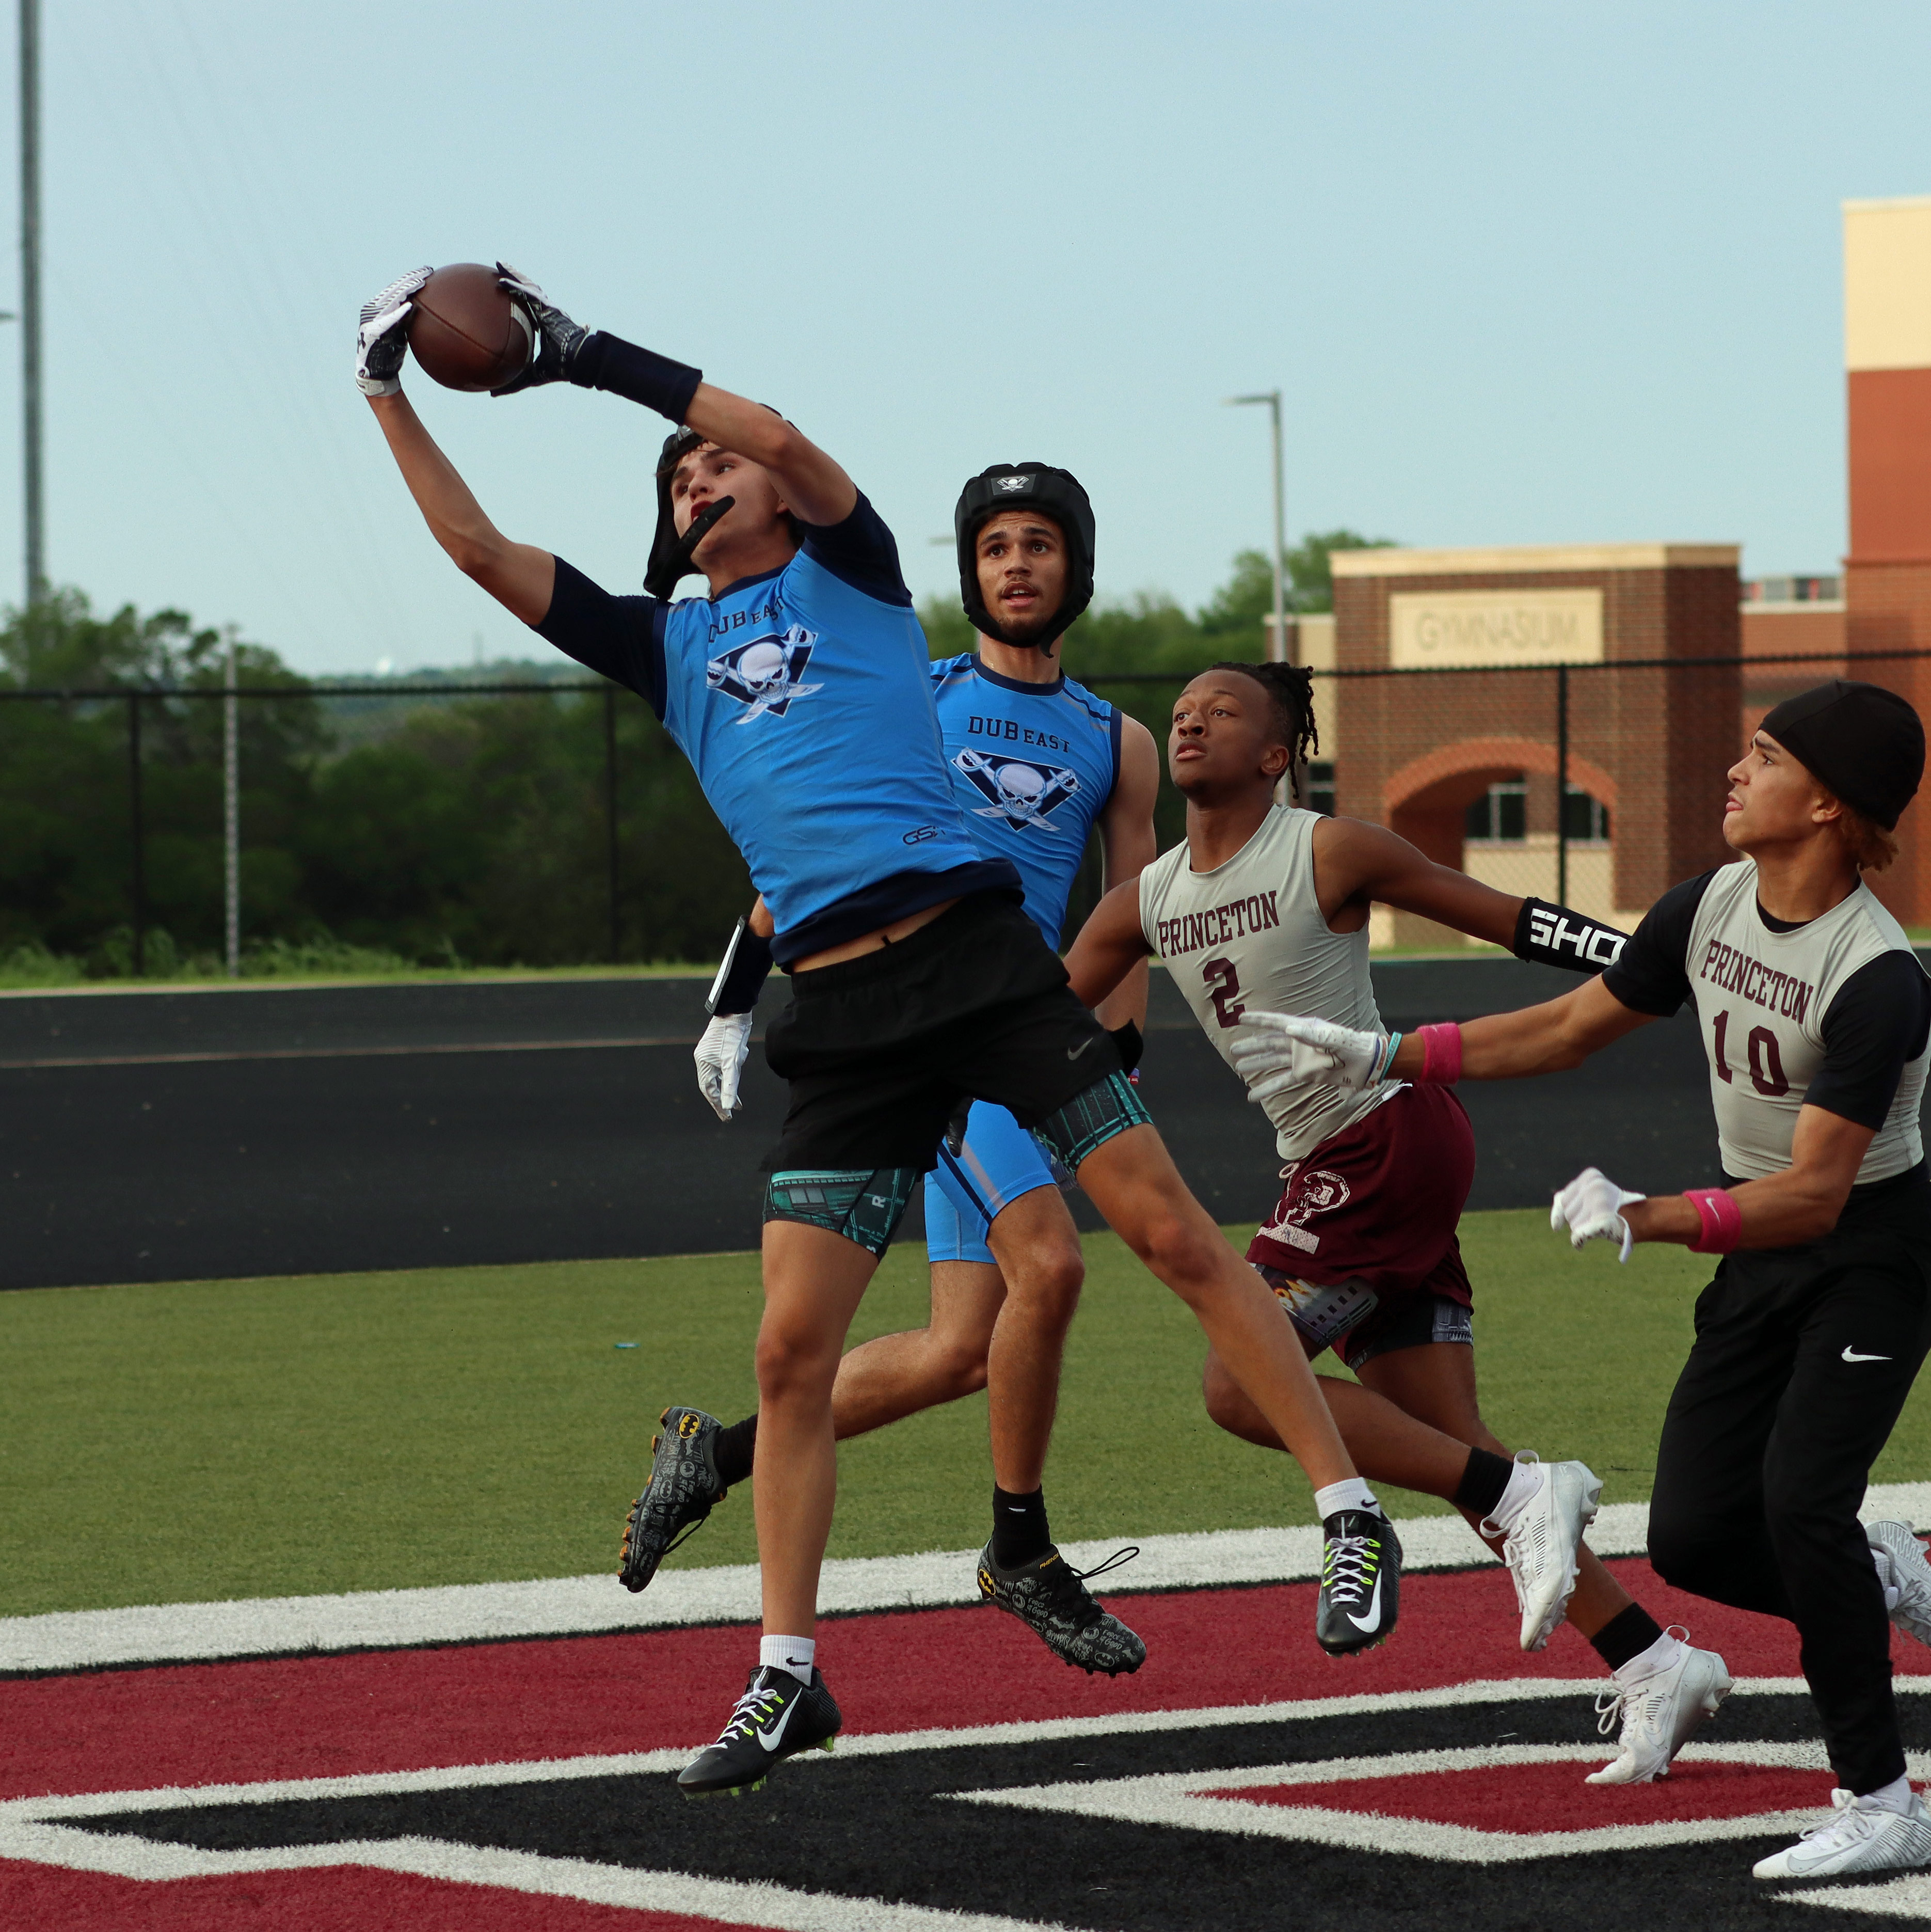 Raiders compete in Princeton 7-on-7 event